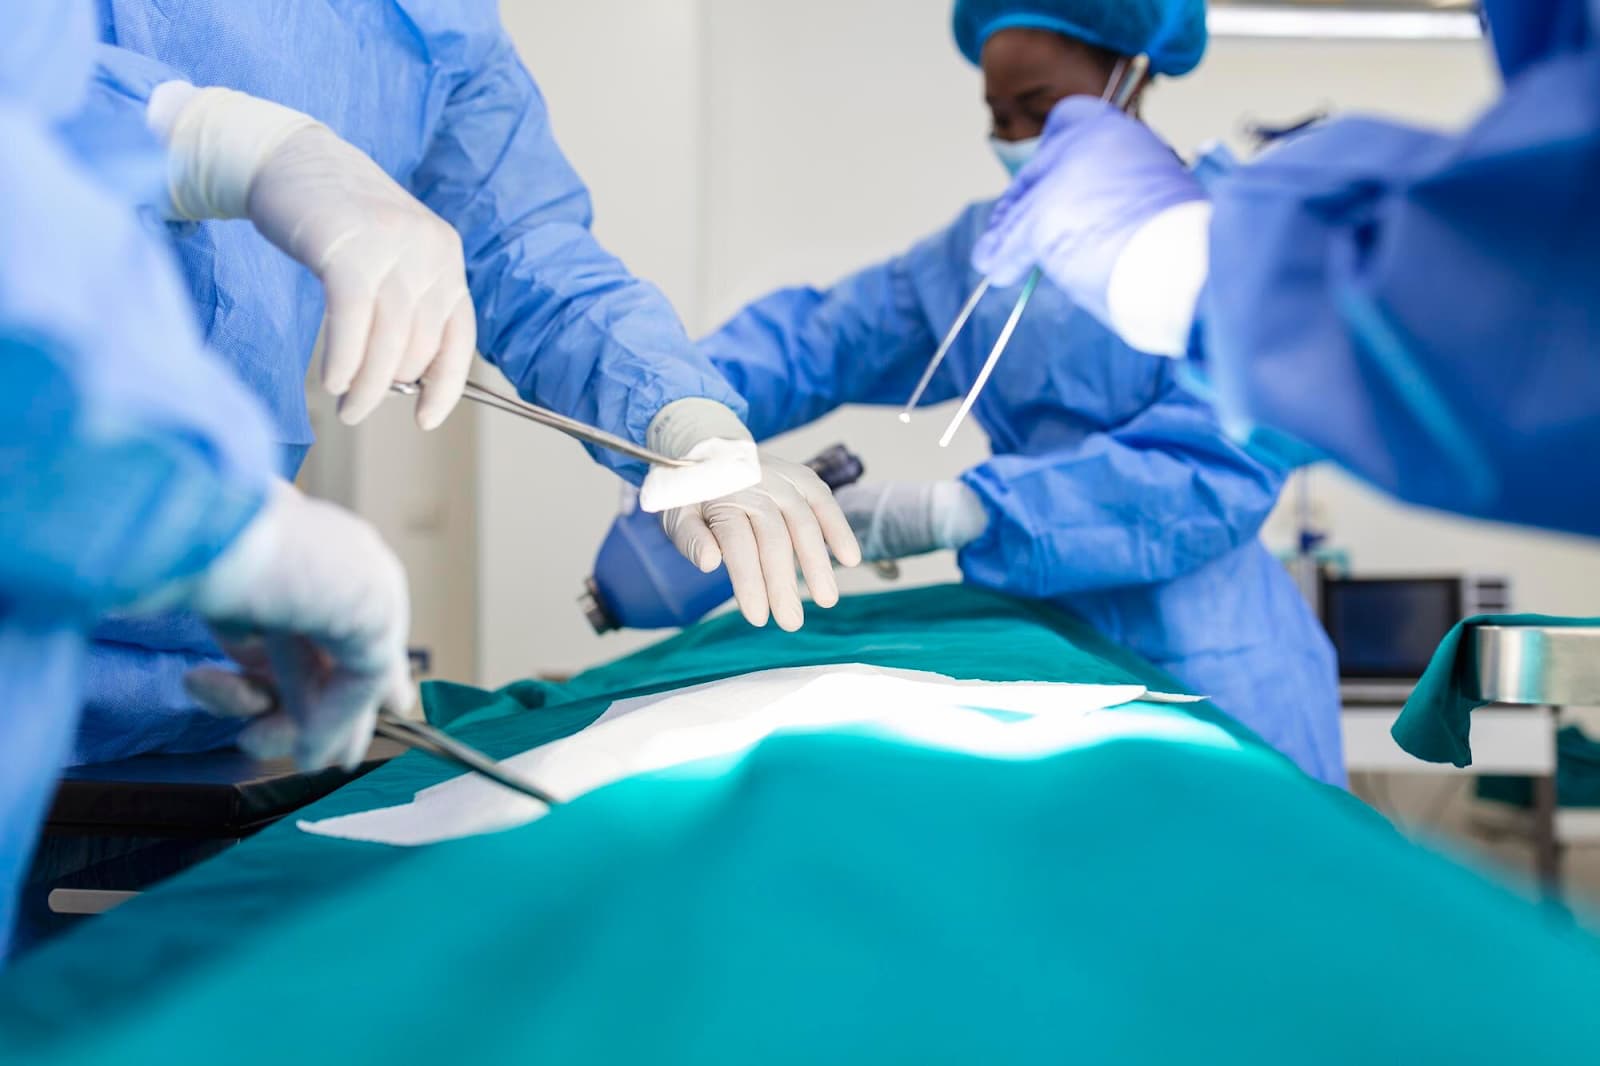 A team of surgeons in uniform performs an operation on a patient